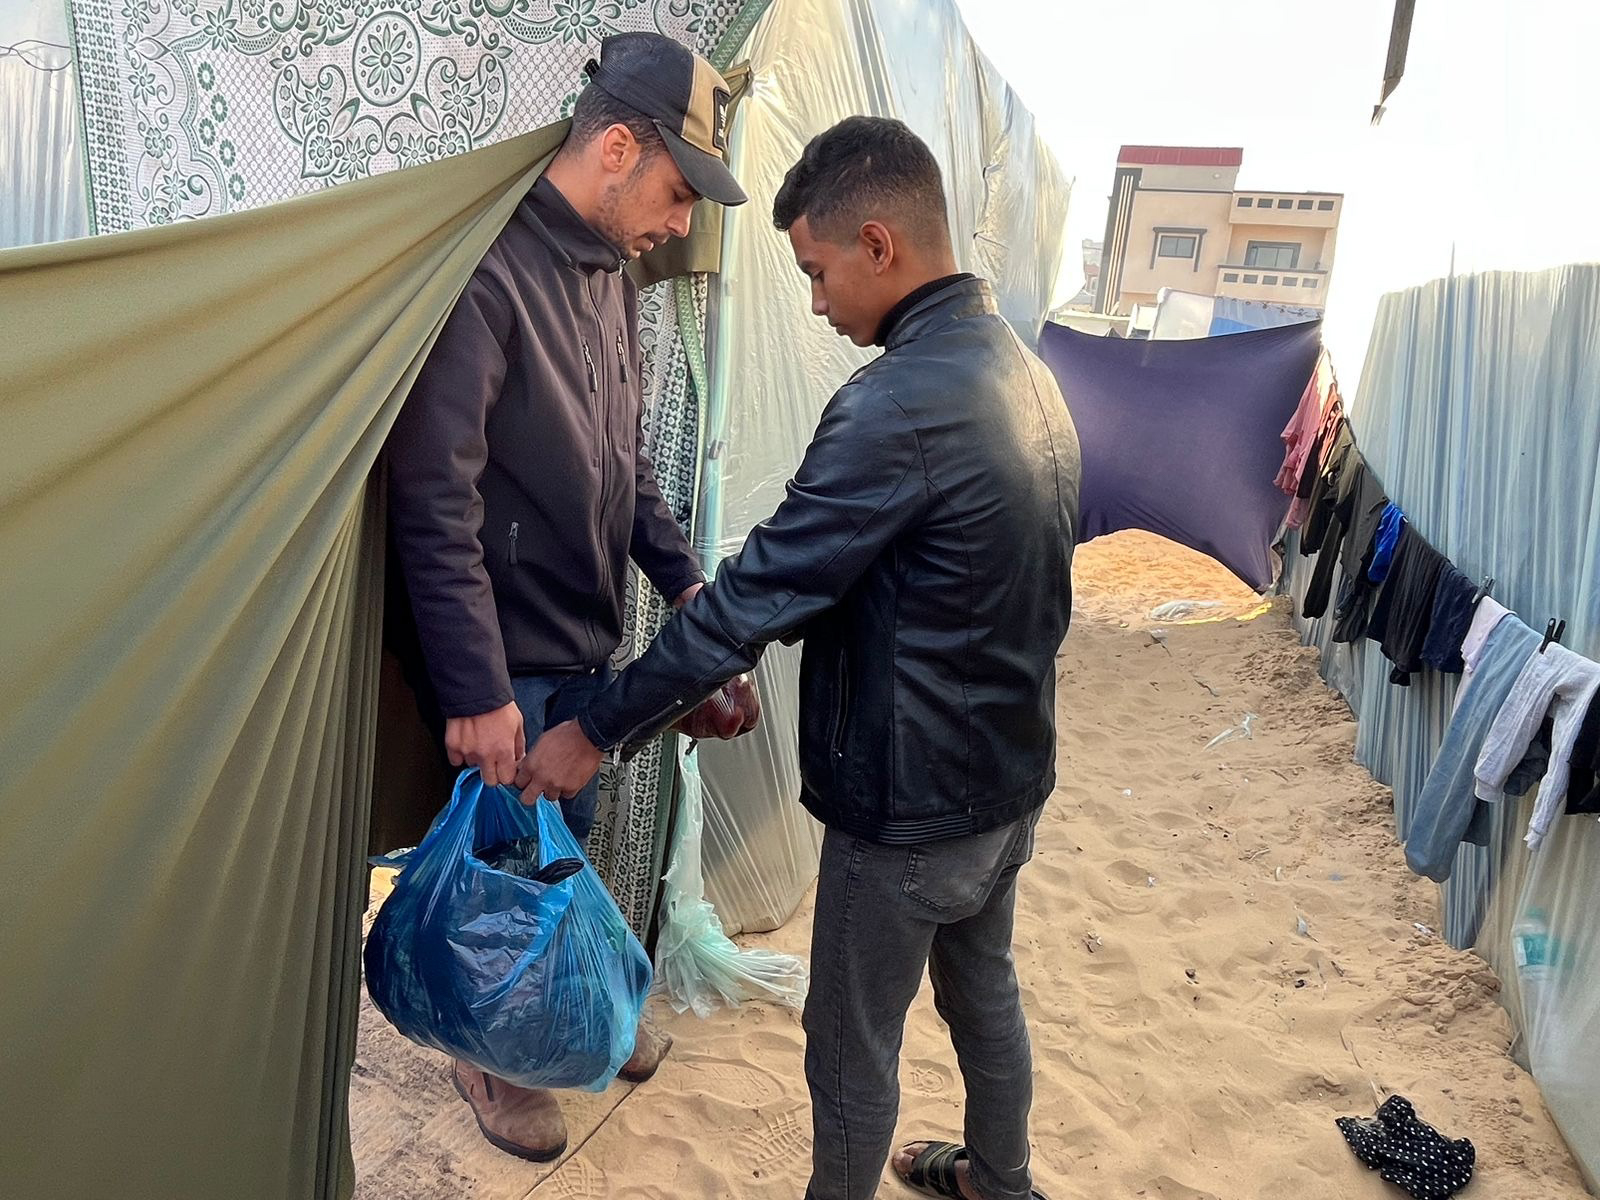 Man hangs bag of food to another man in a tent